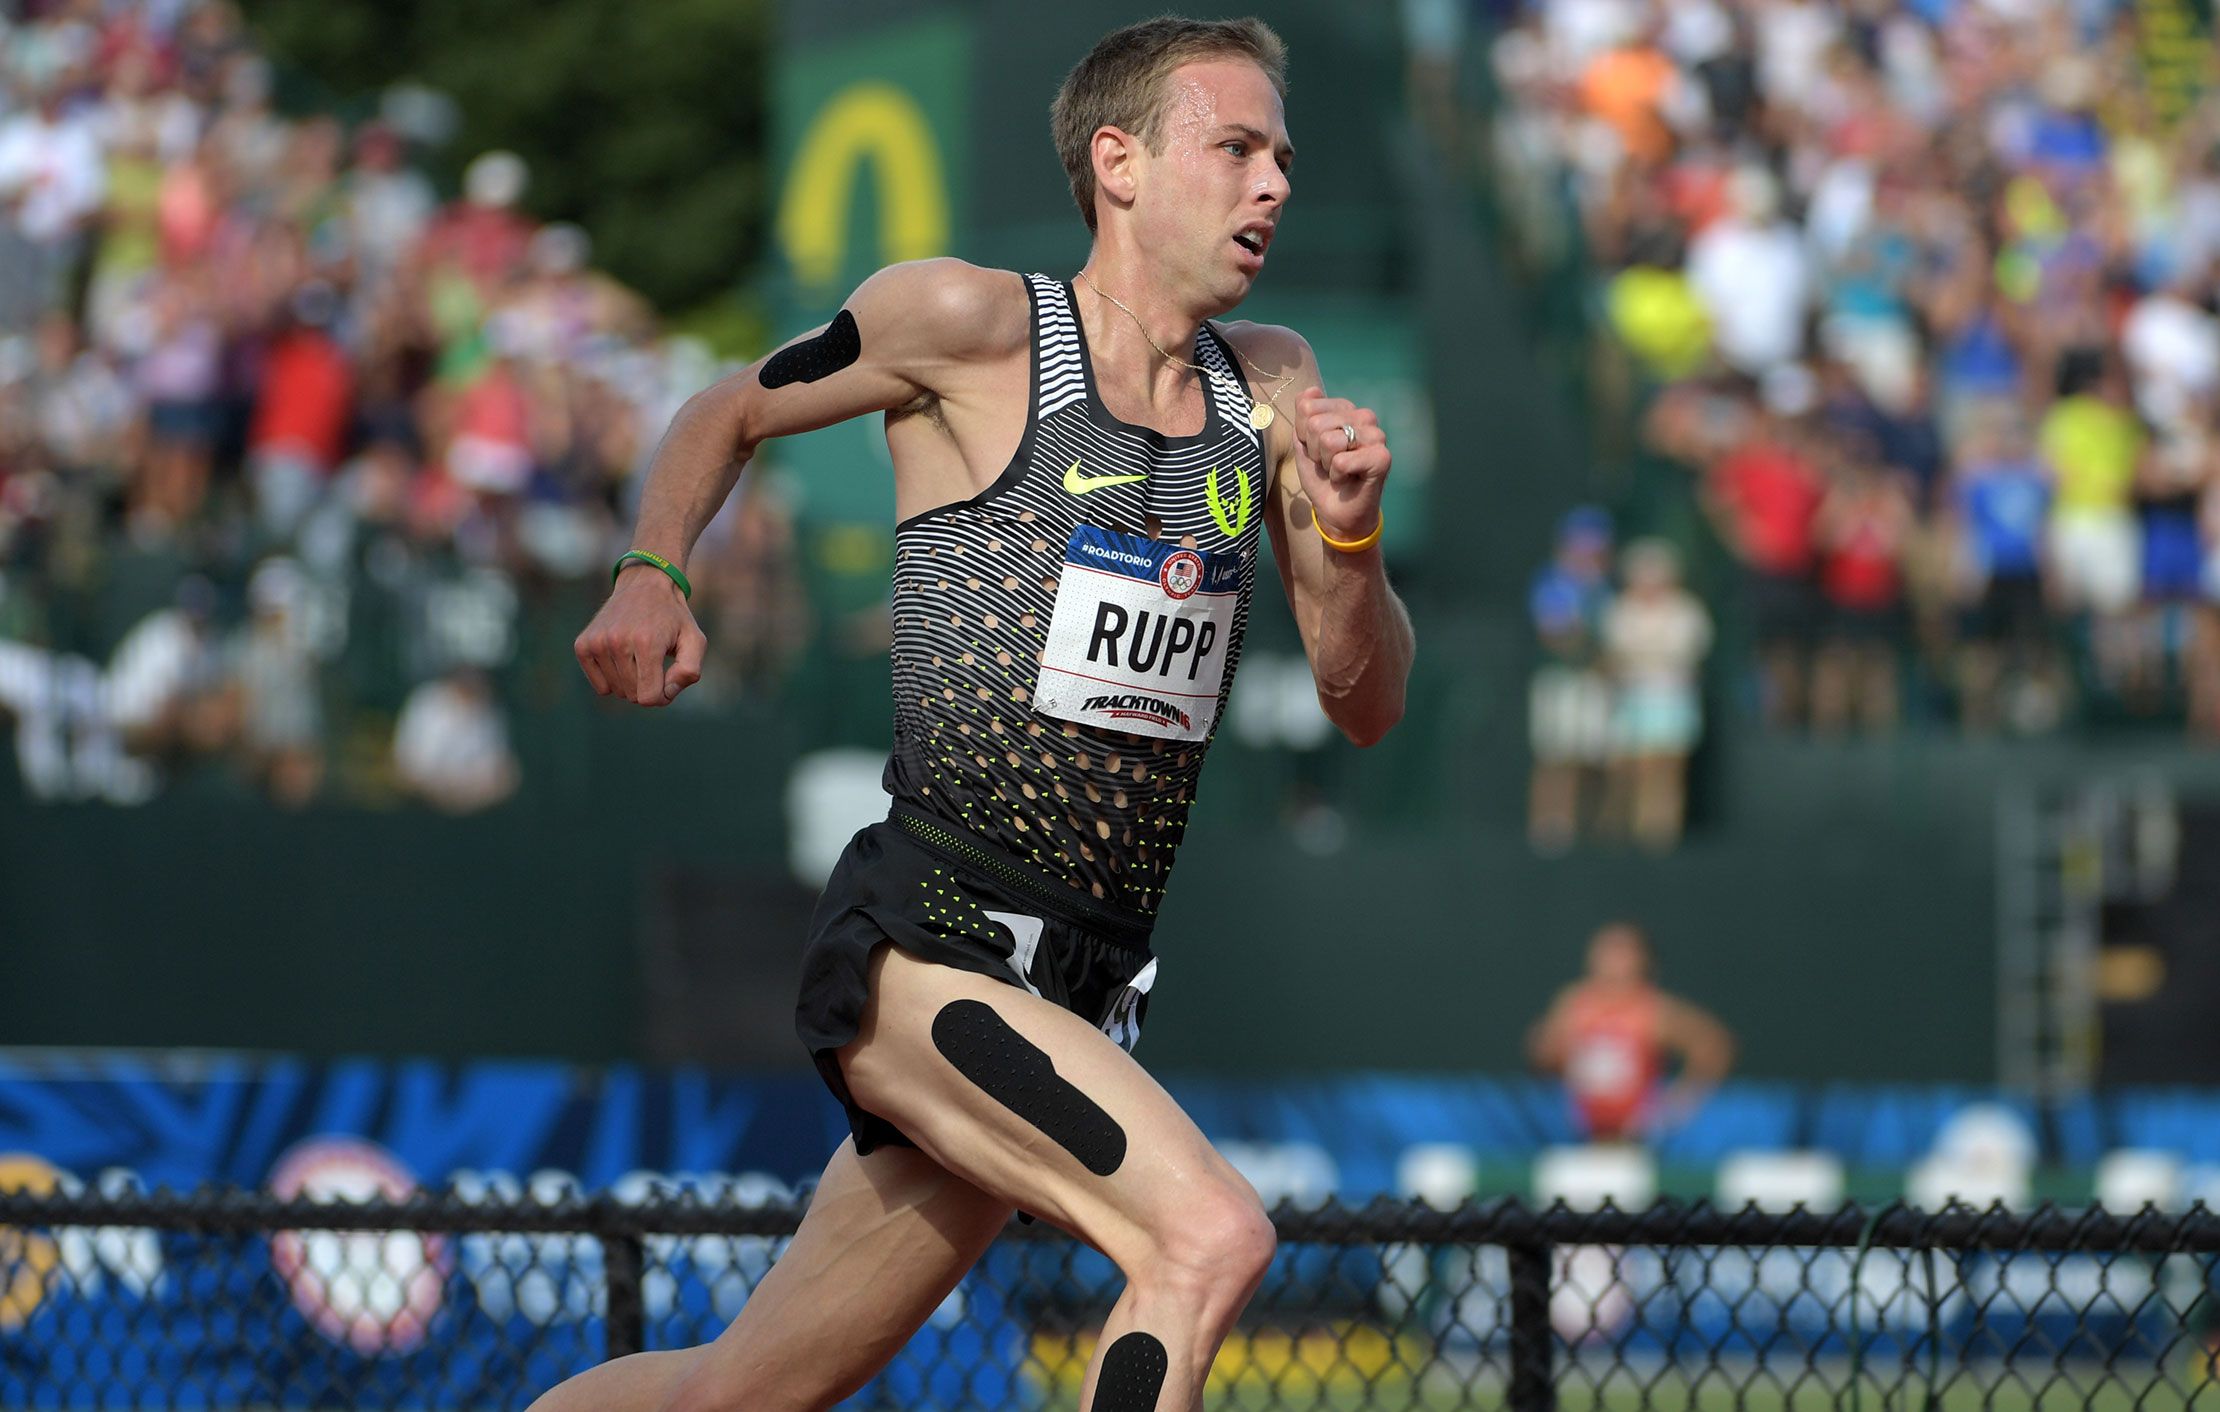 amplificación promedio Plisado Why Is Galen Rupp Covered in Black Tape When He Races? | Runner's World